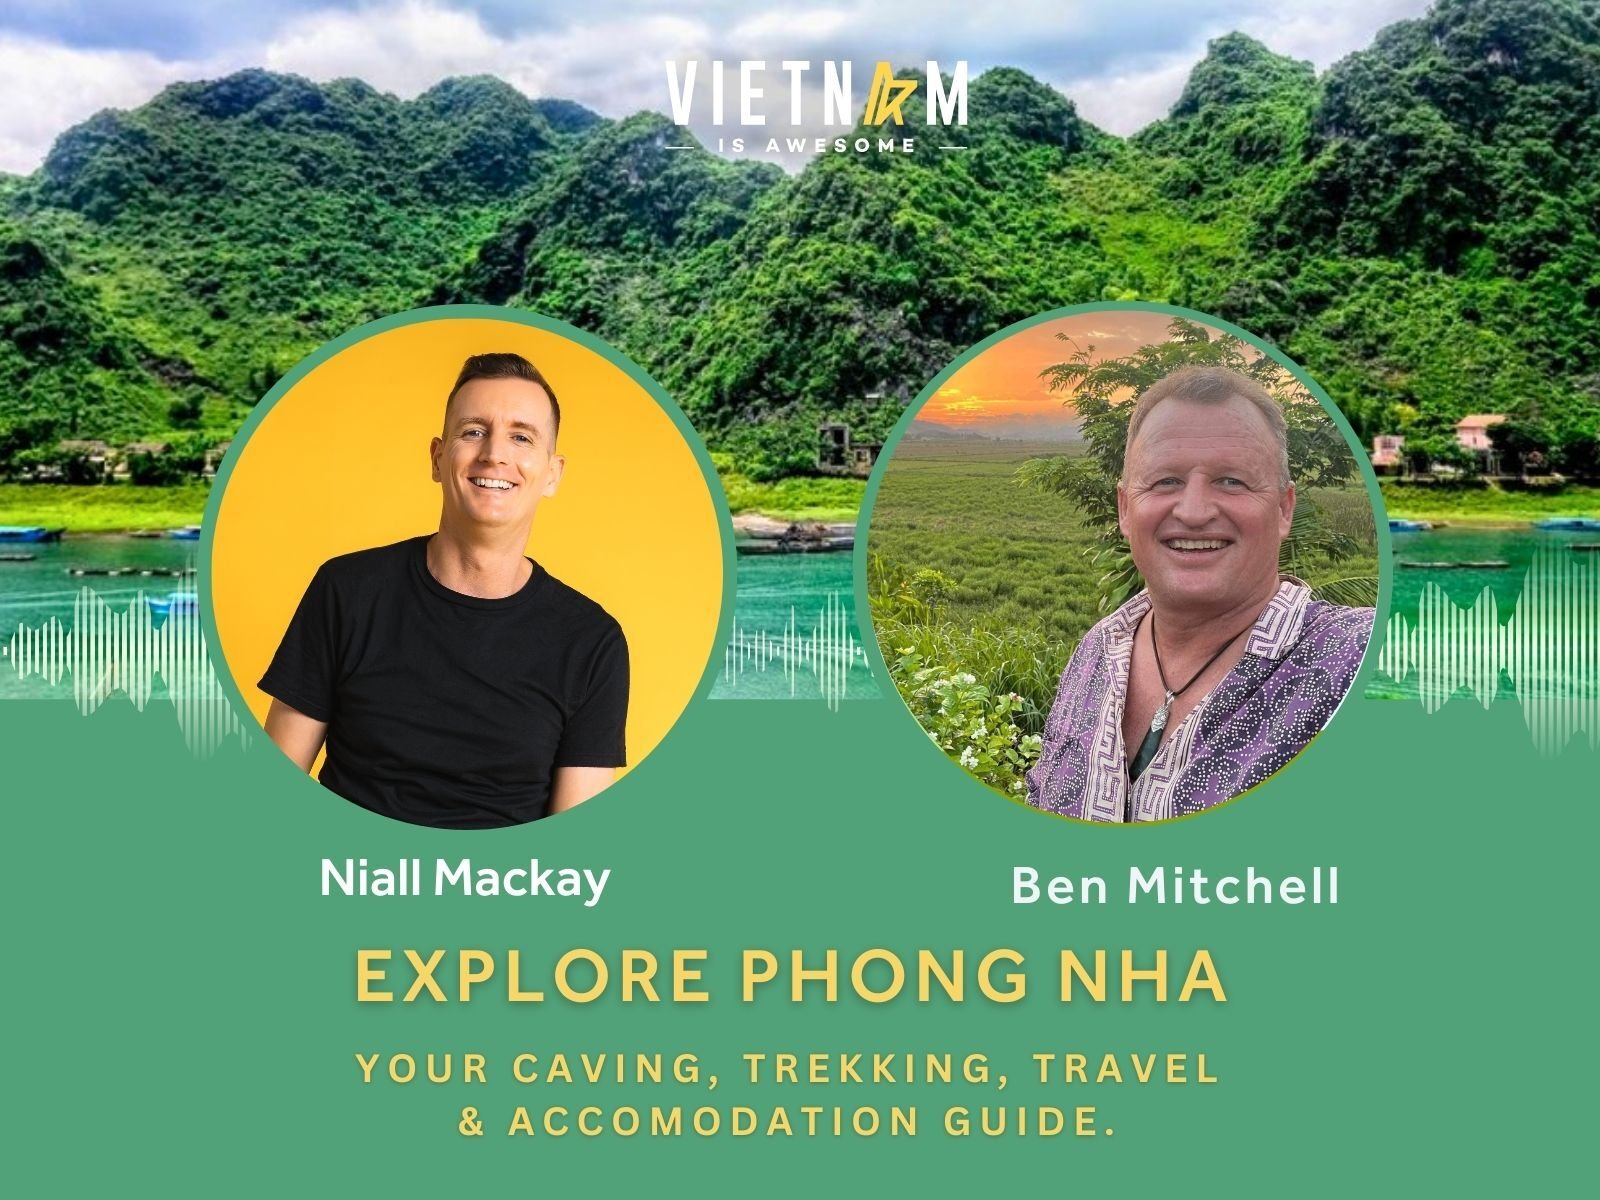 Template 2 - Discover The Wonder & Beauty of Phong Nha With Ben Mitchell